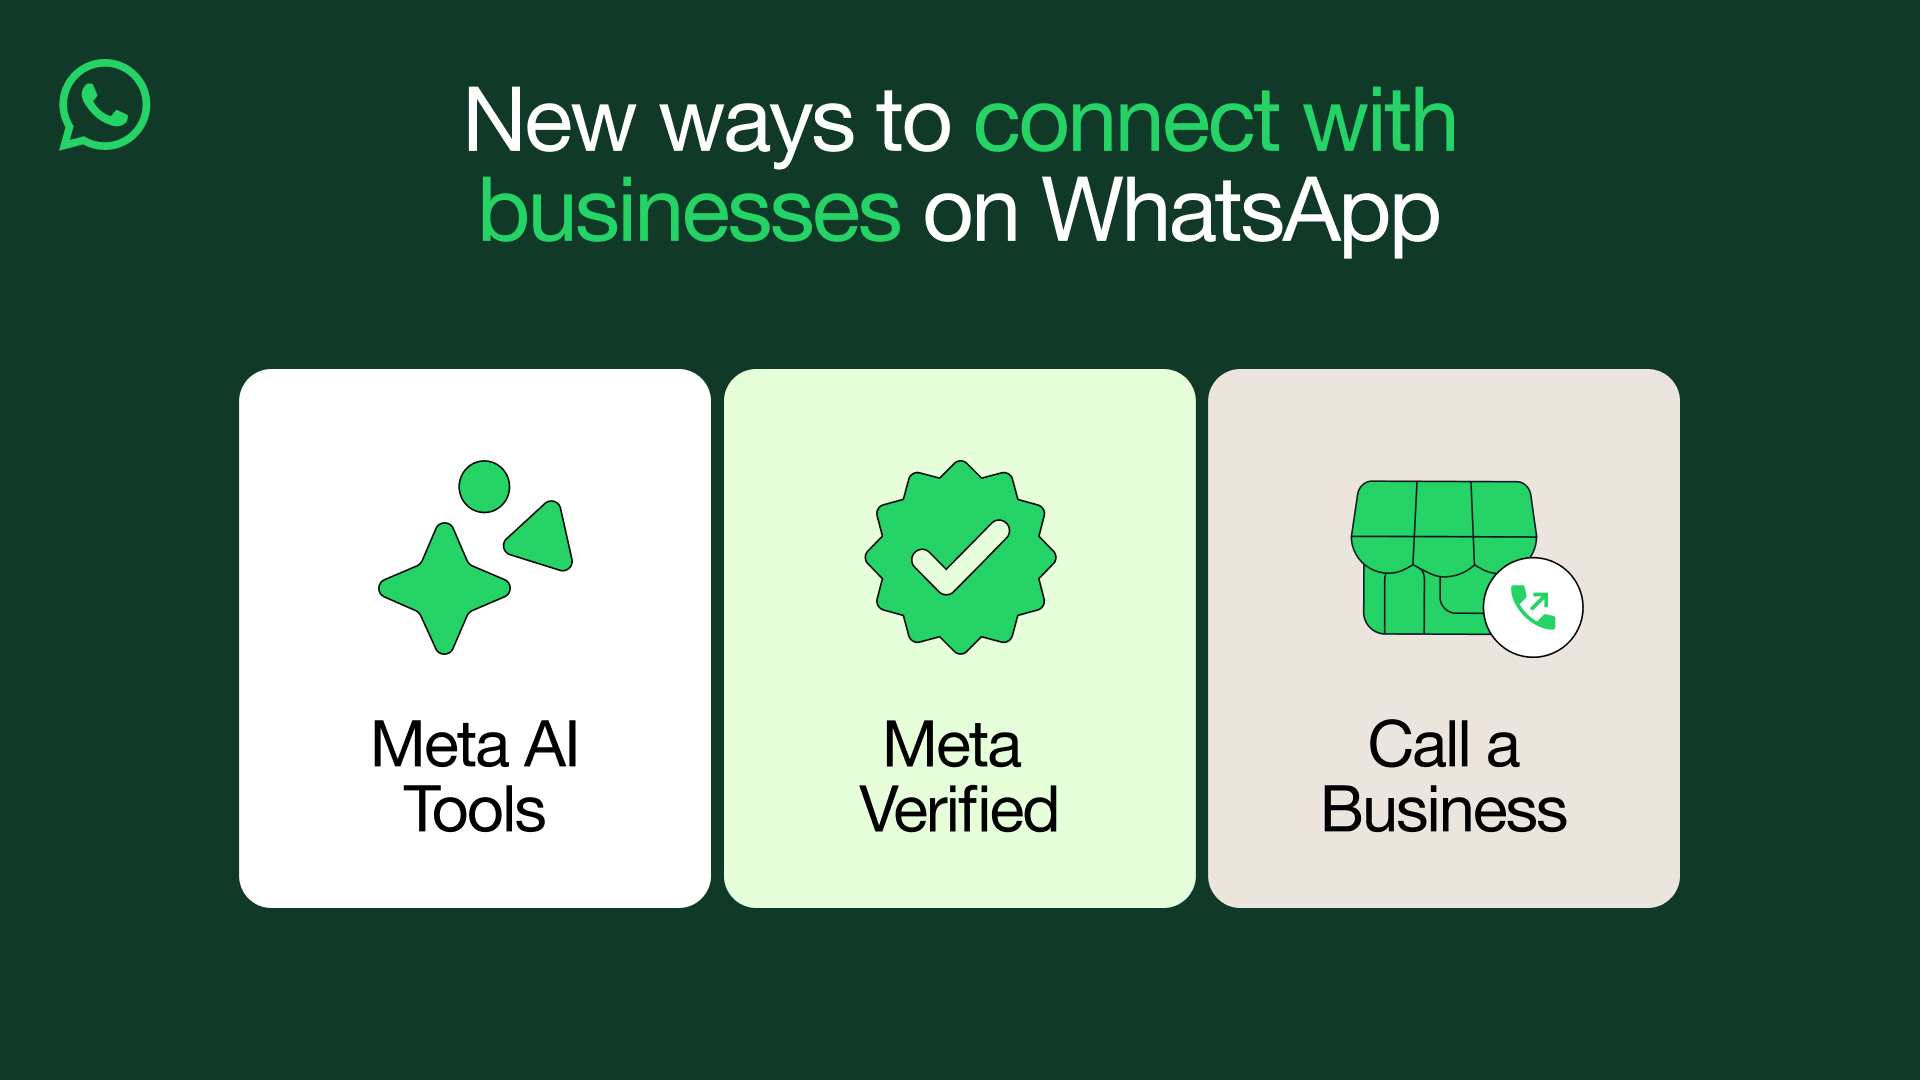 An image showing three new ways to connect with businesses on WhatsApp.